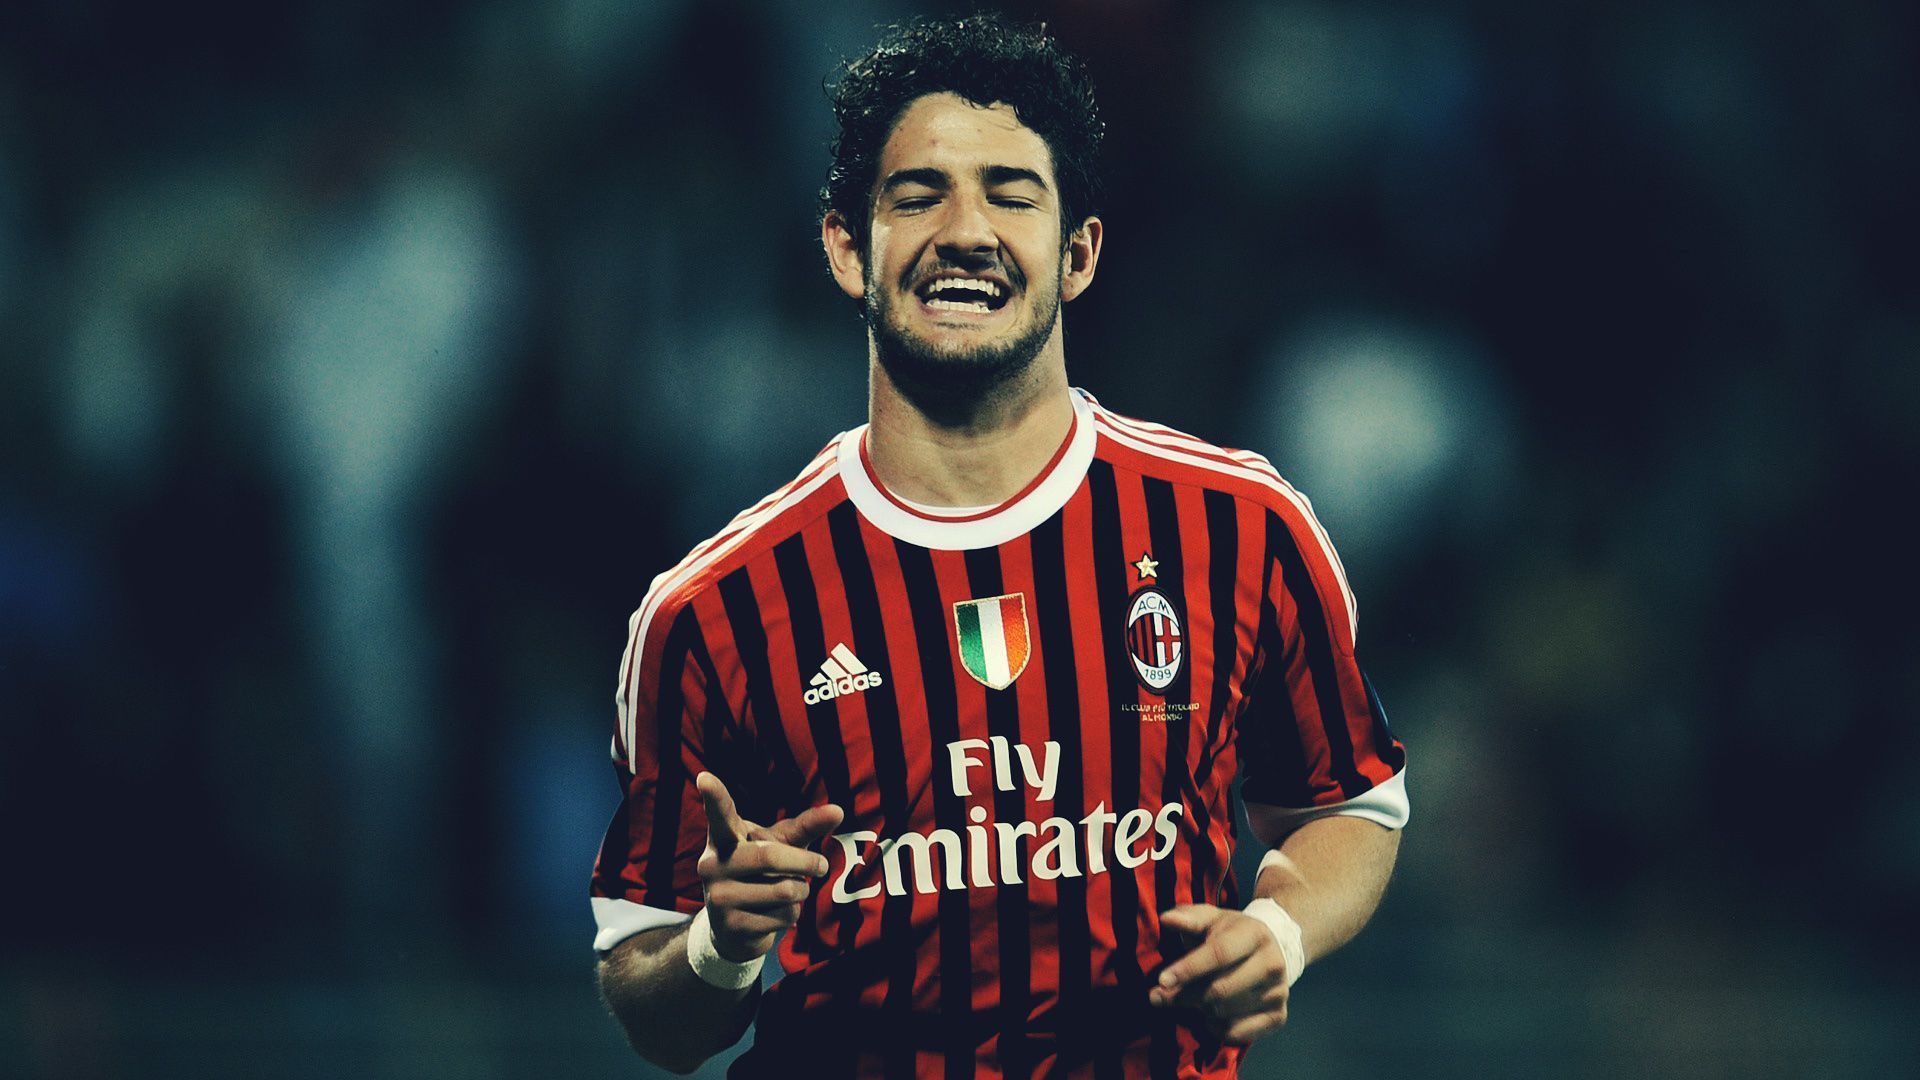 This is the life and times of Alexandre Pato, how such a promising career at Milan turned into a great big disappointment